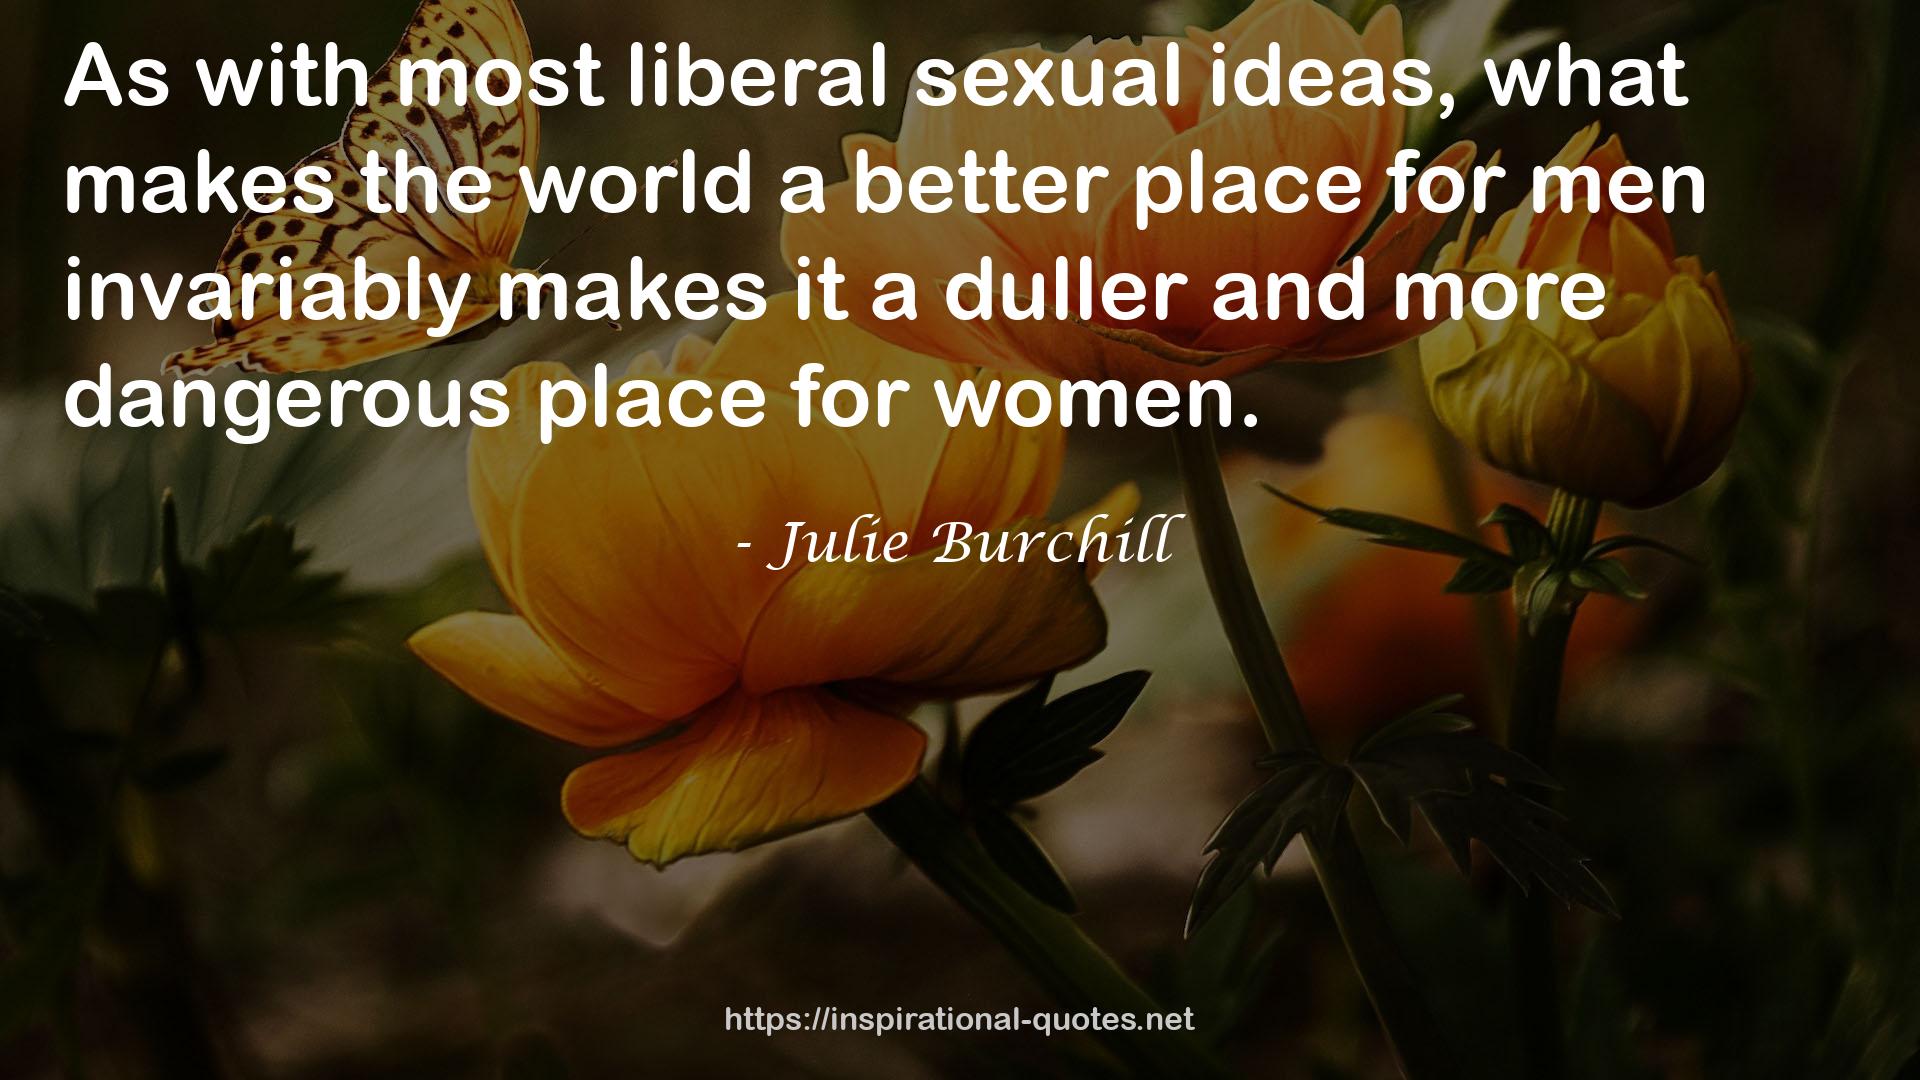 Julie Burchill QUOTES